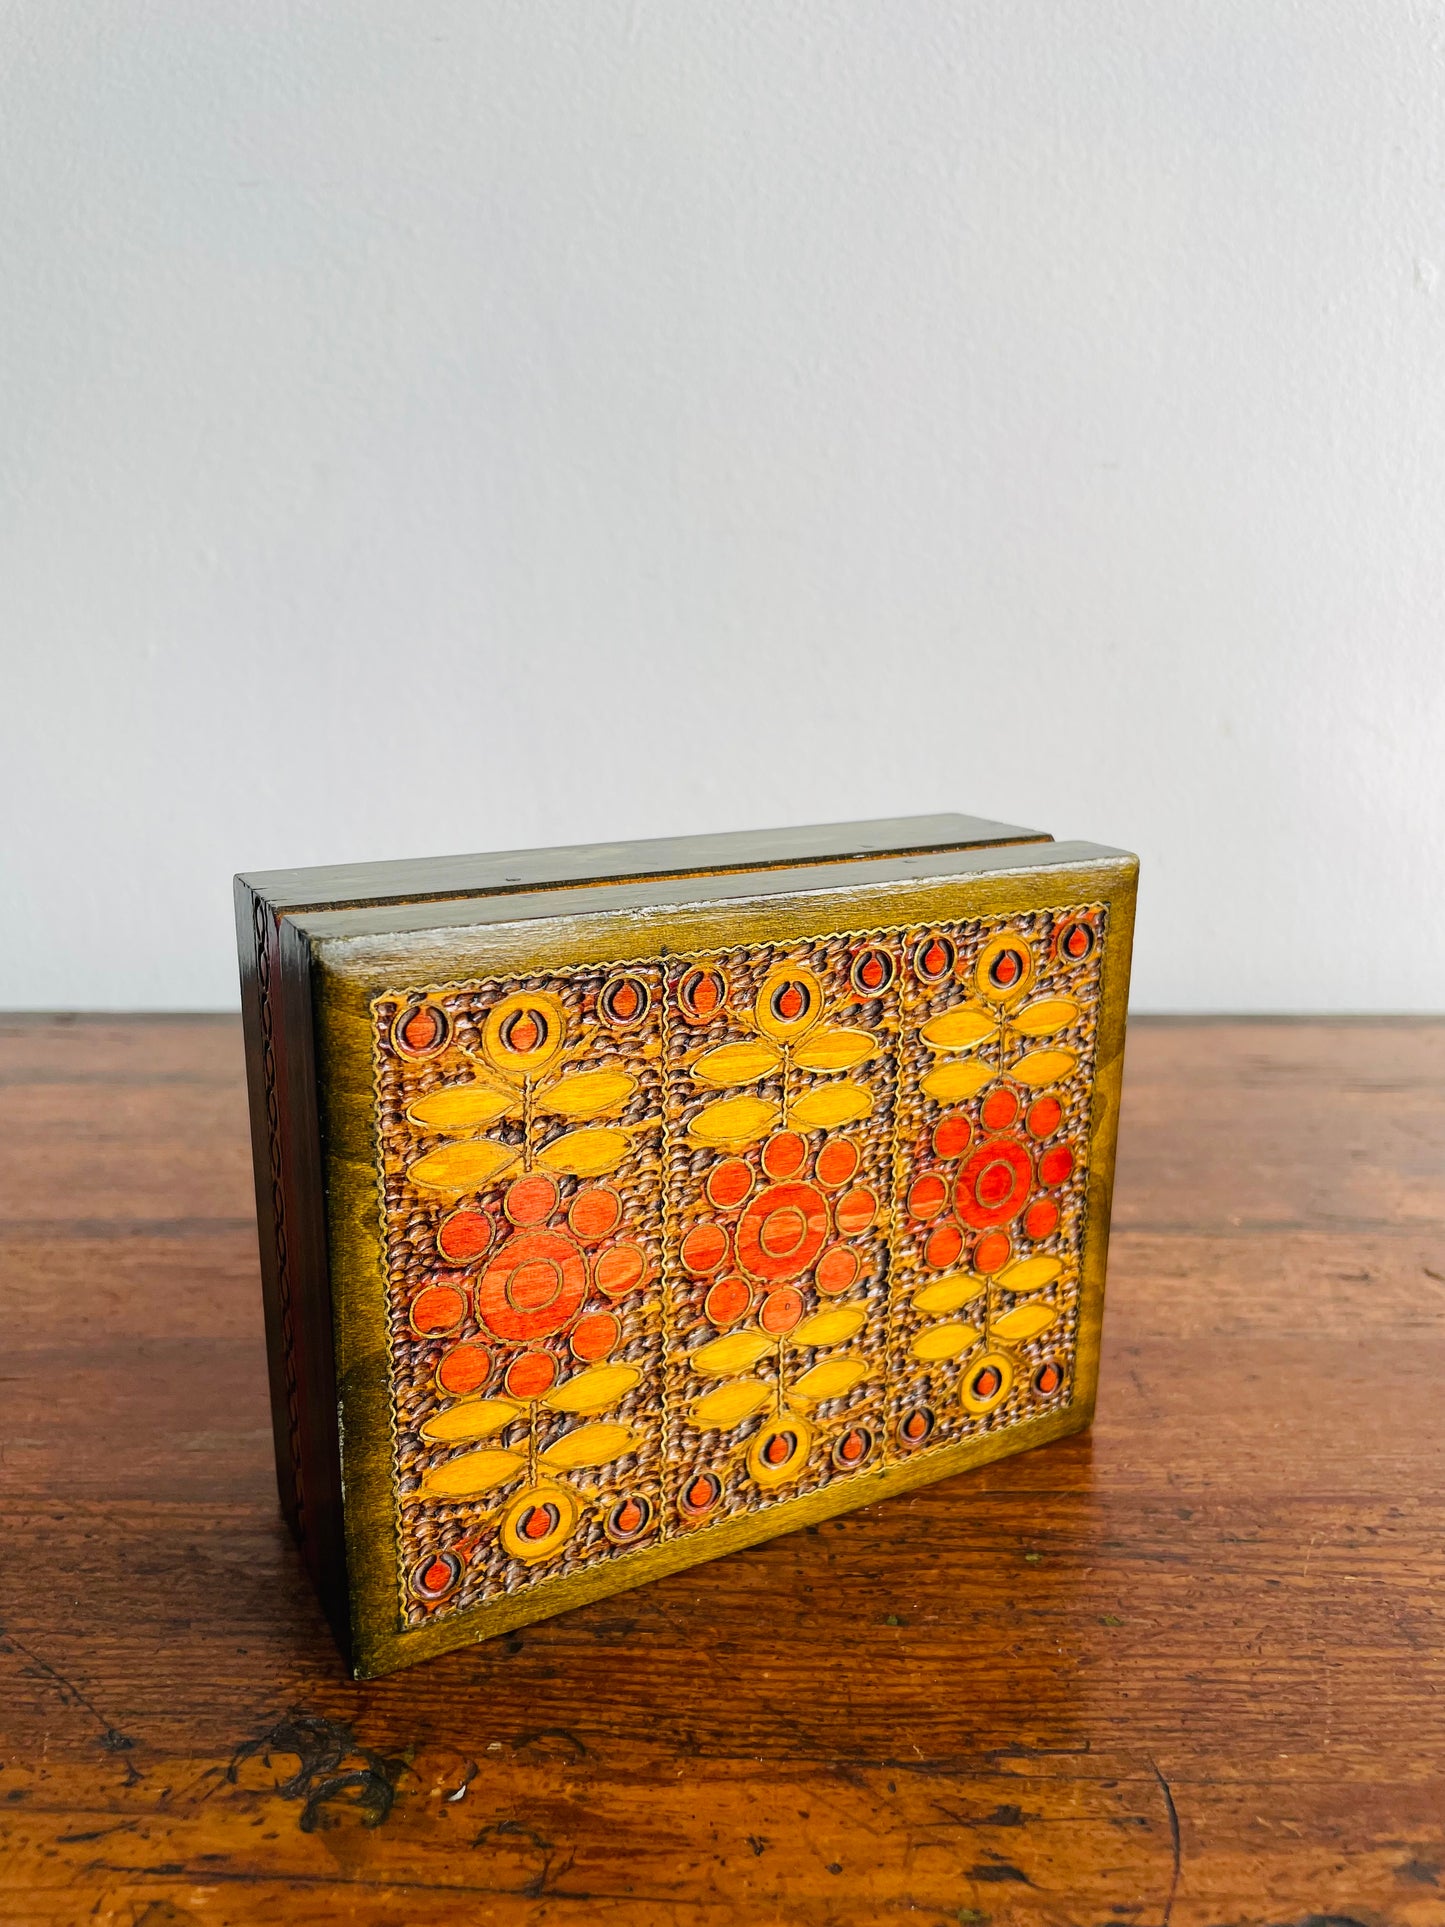 Carved Wood Trinket Box with Hinged Lid & Floral Design - Made in Poland - Great for Holding Card Decks!